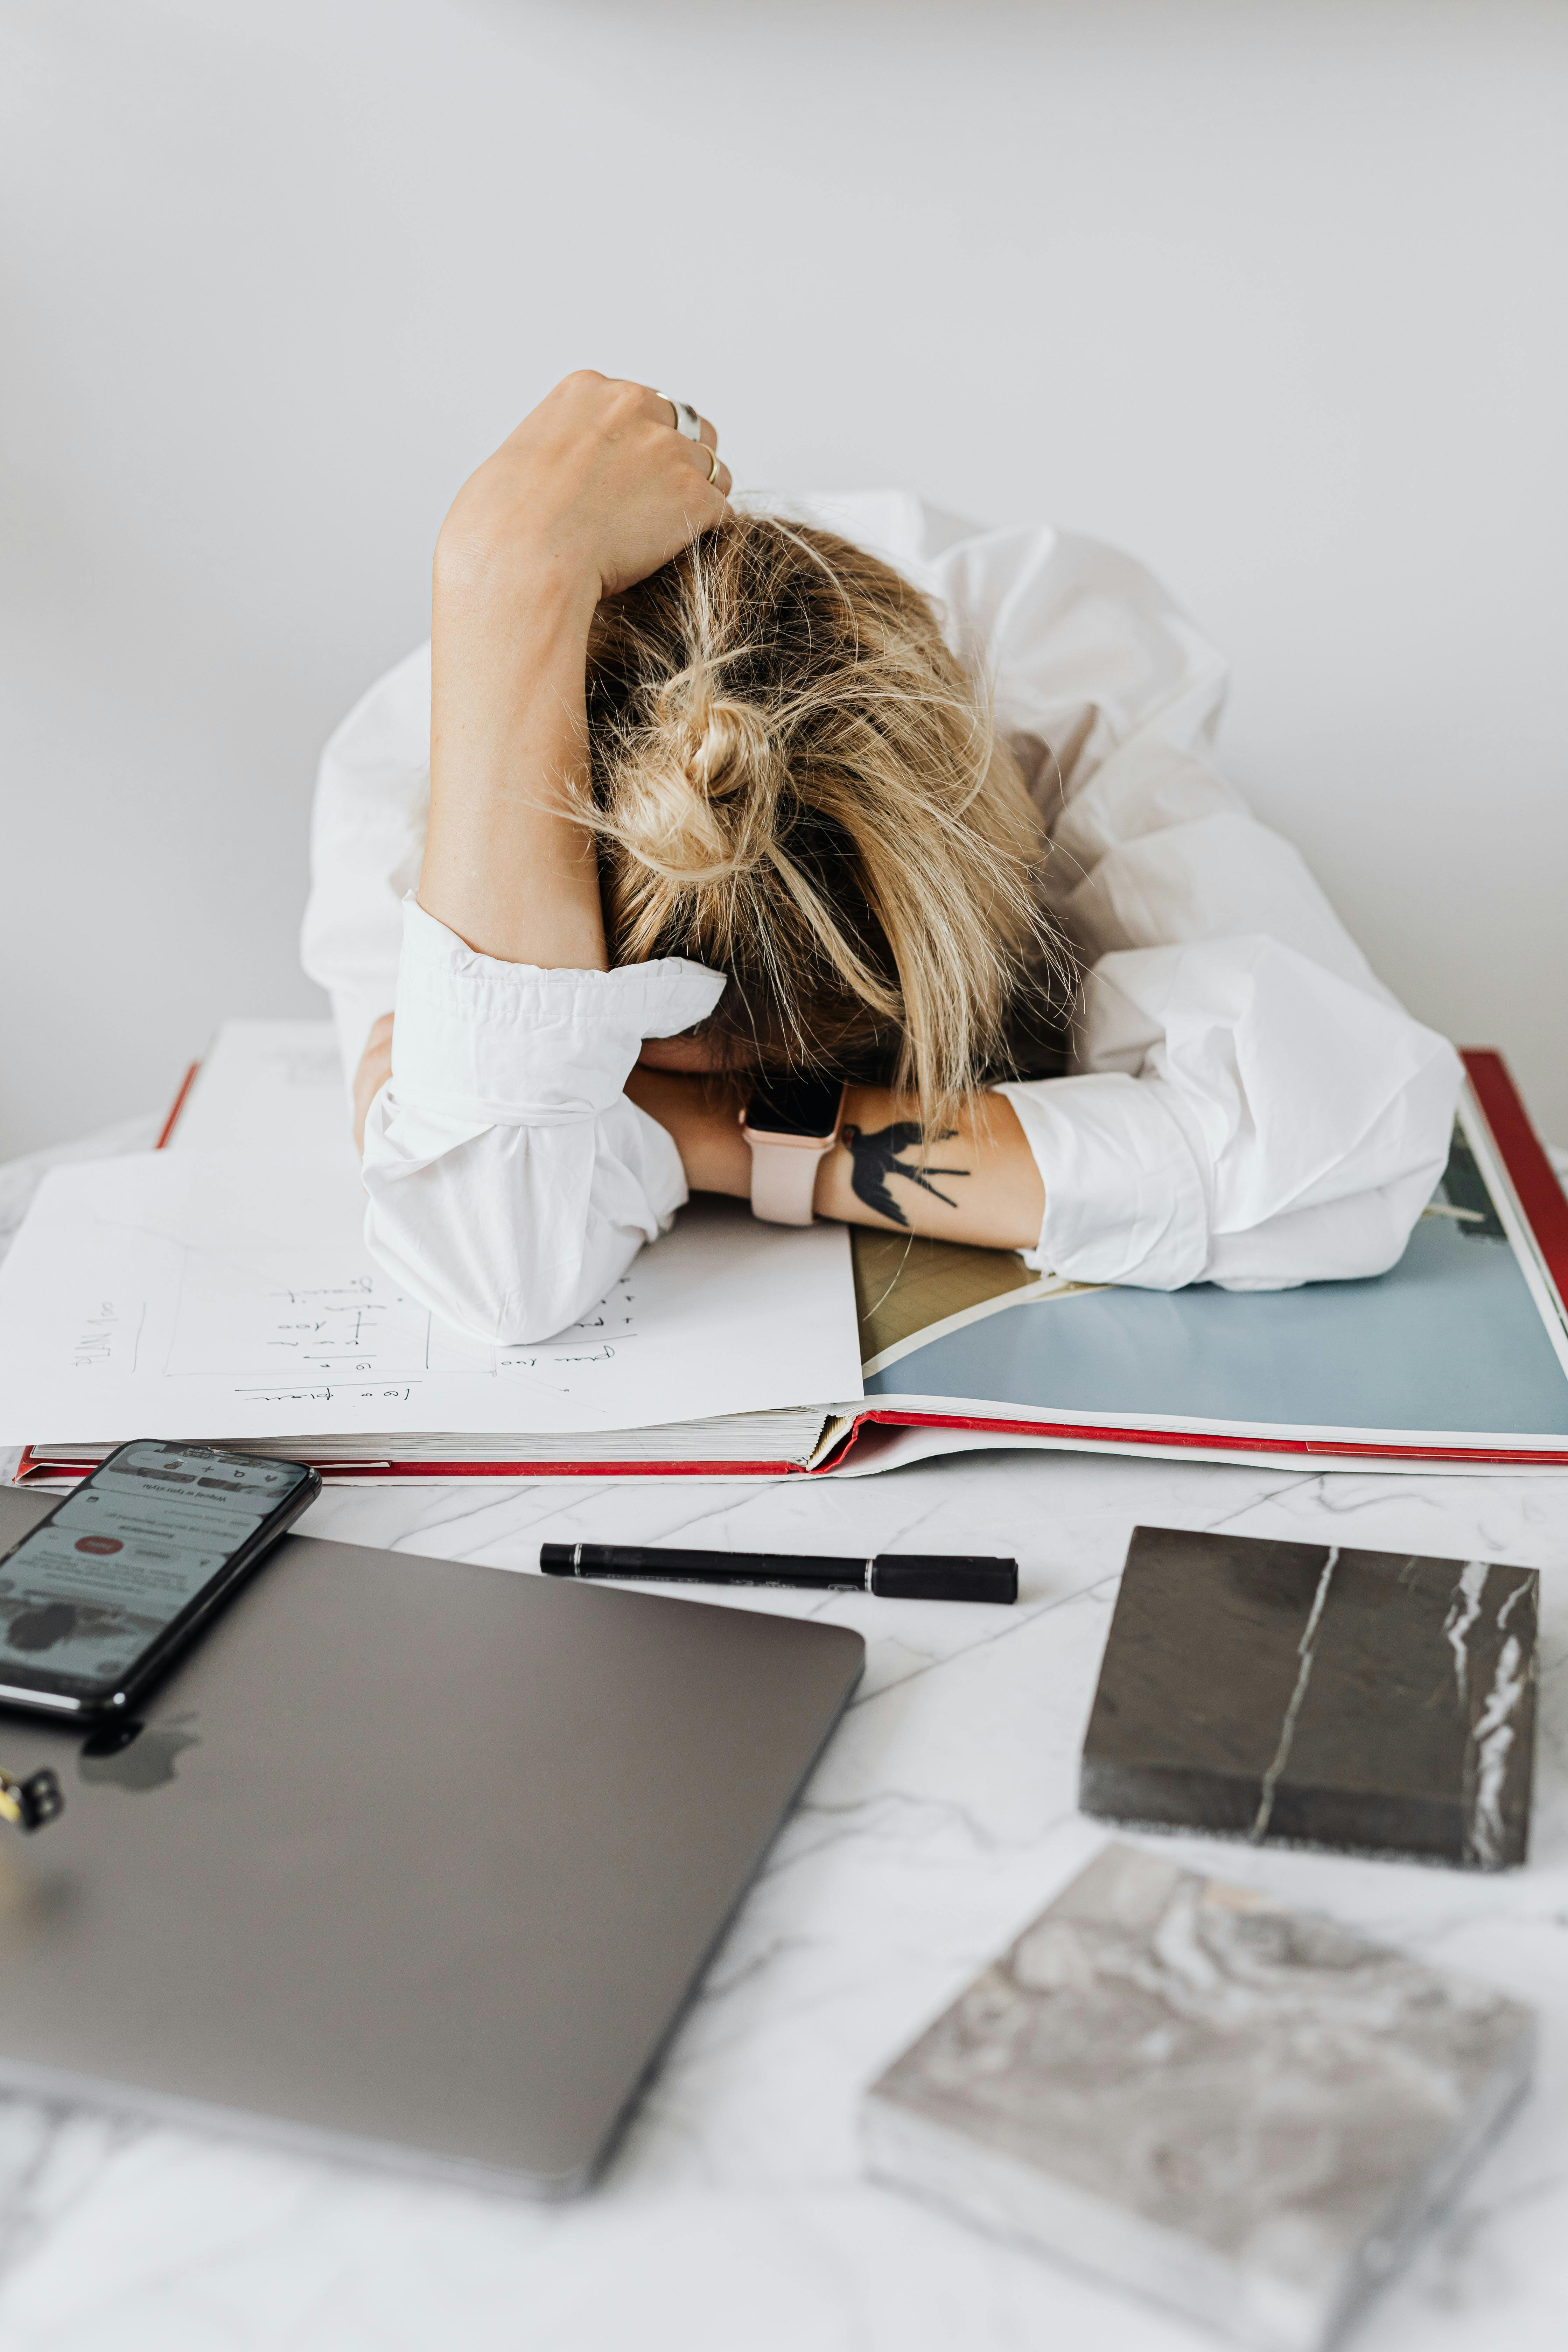 A frustrated woman laying her head on a table | Source: Pexels